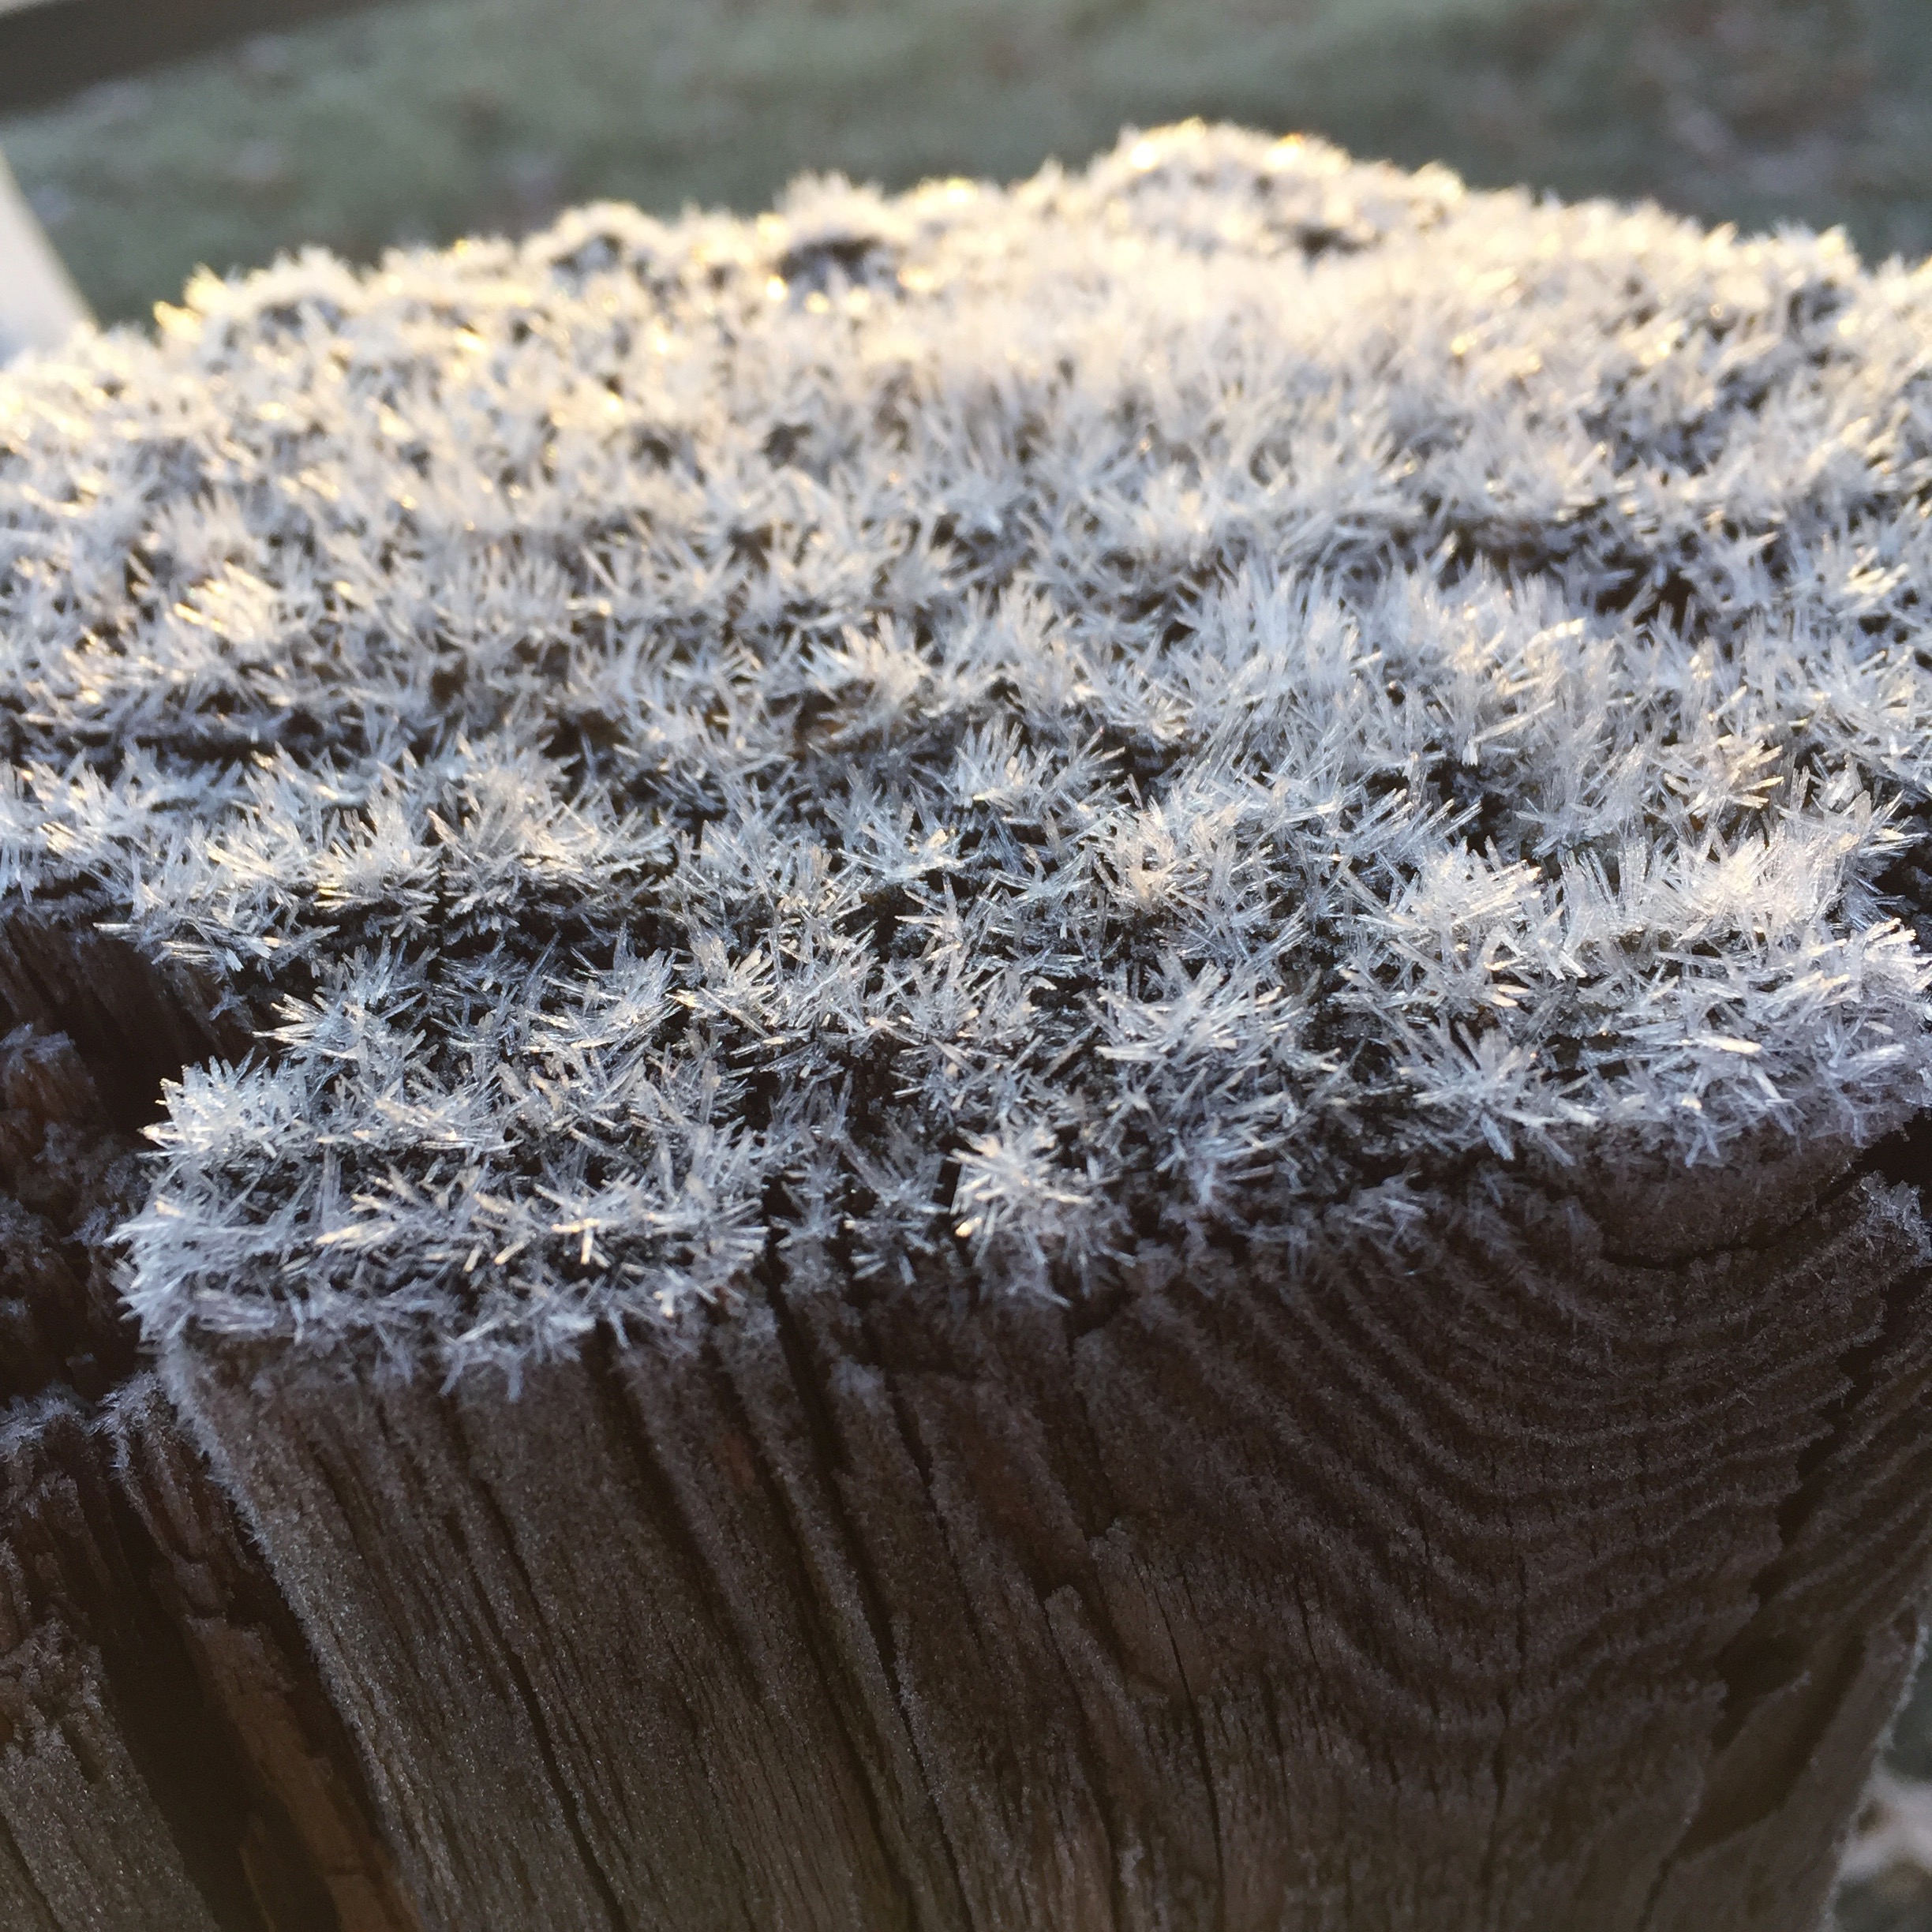 20151204-frost-on-fence-post-photo-taken-with-iphone-6-plus-by-greg-johsnon-iowa-city-2448x2448-img_4169